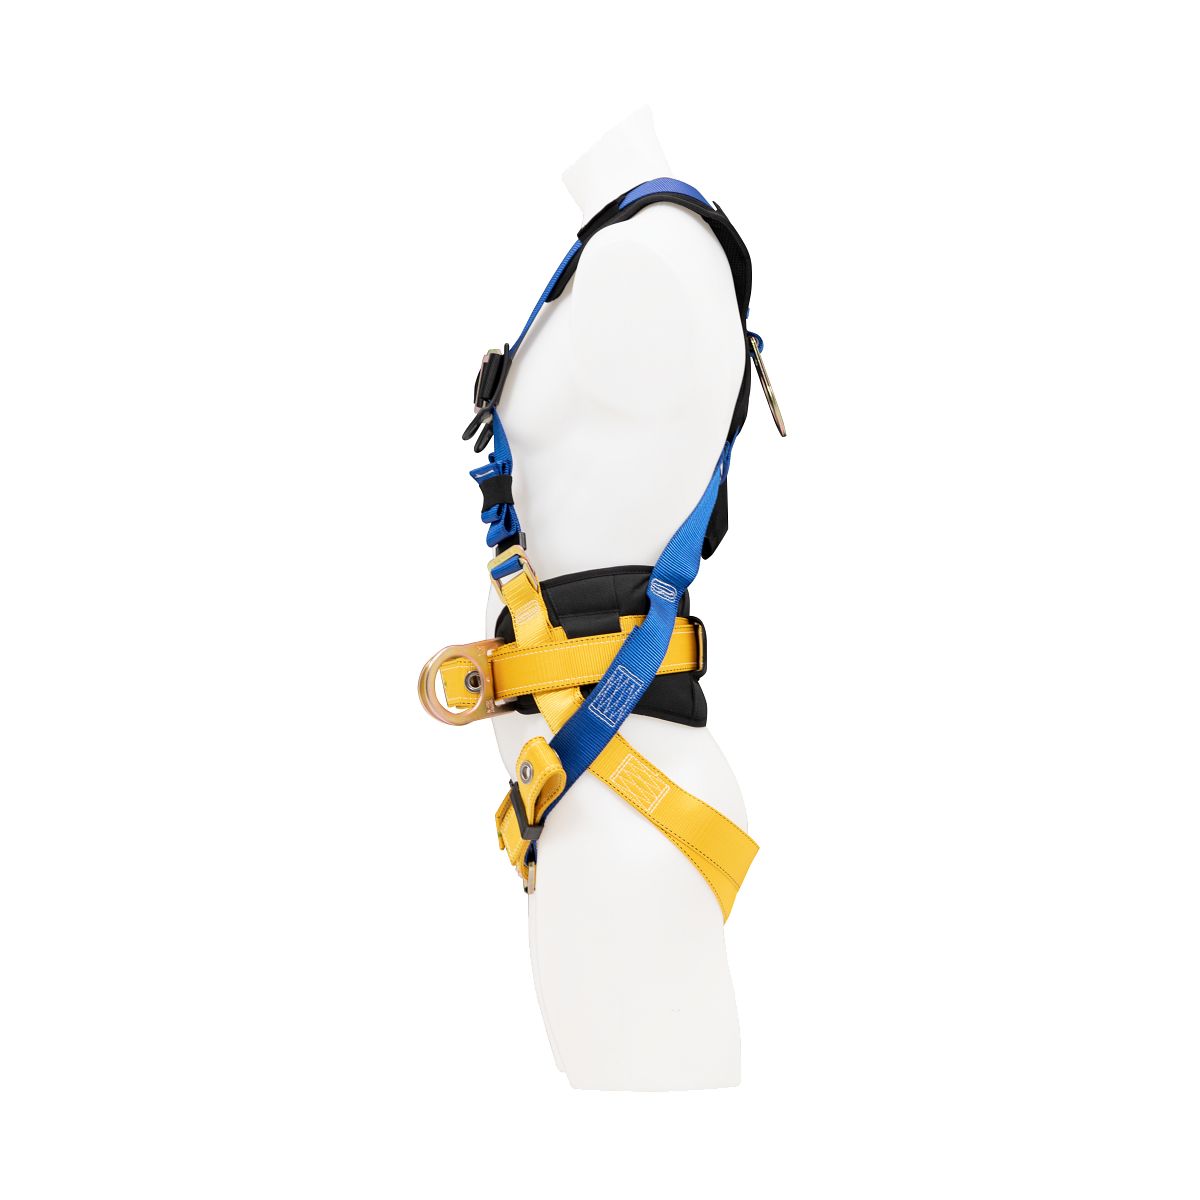 Werner BaseWear Construction Harness from Columbia Safety